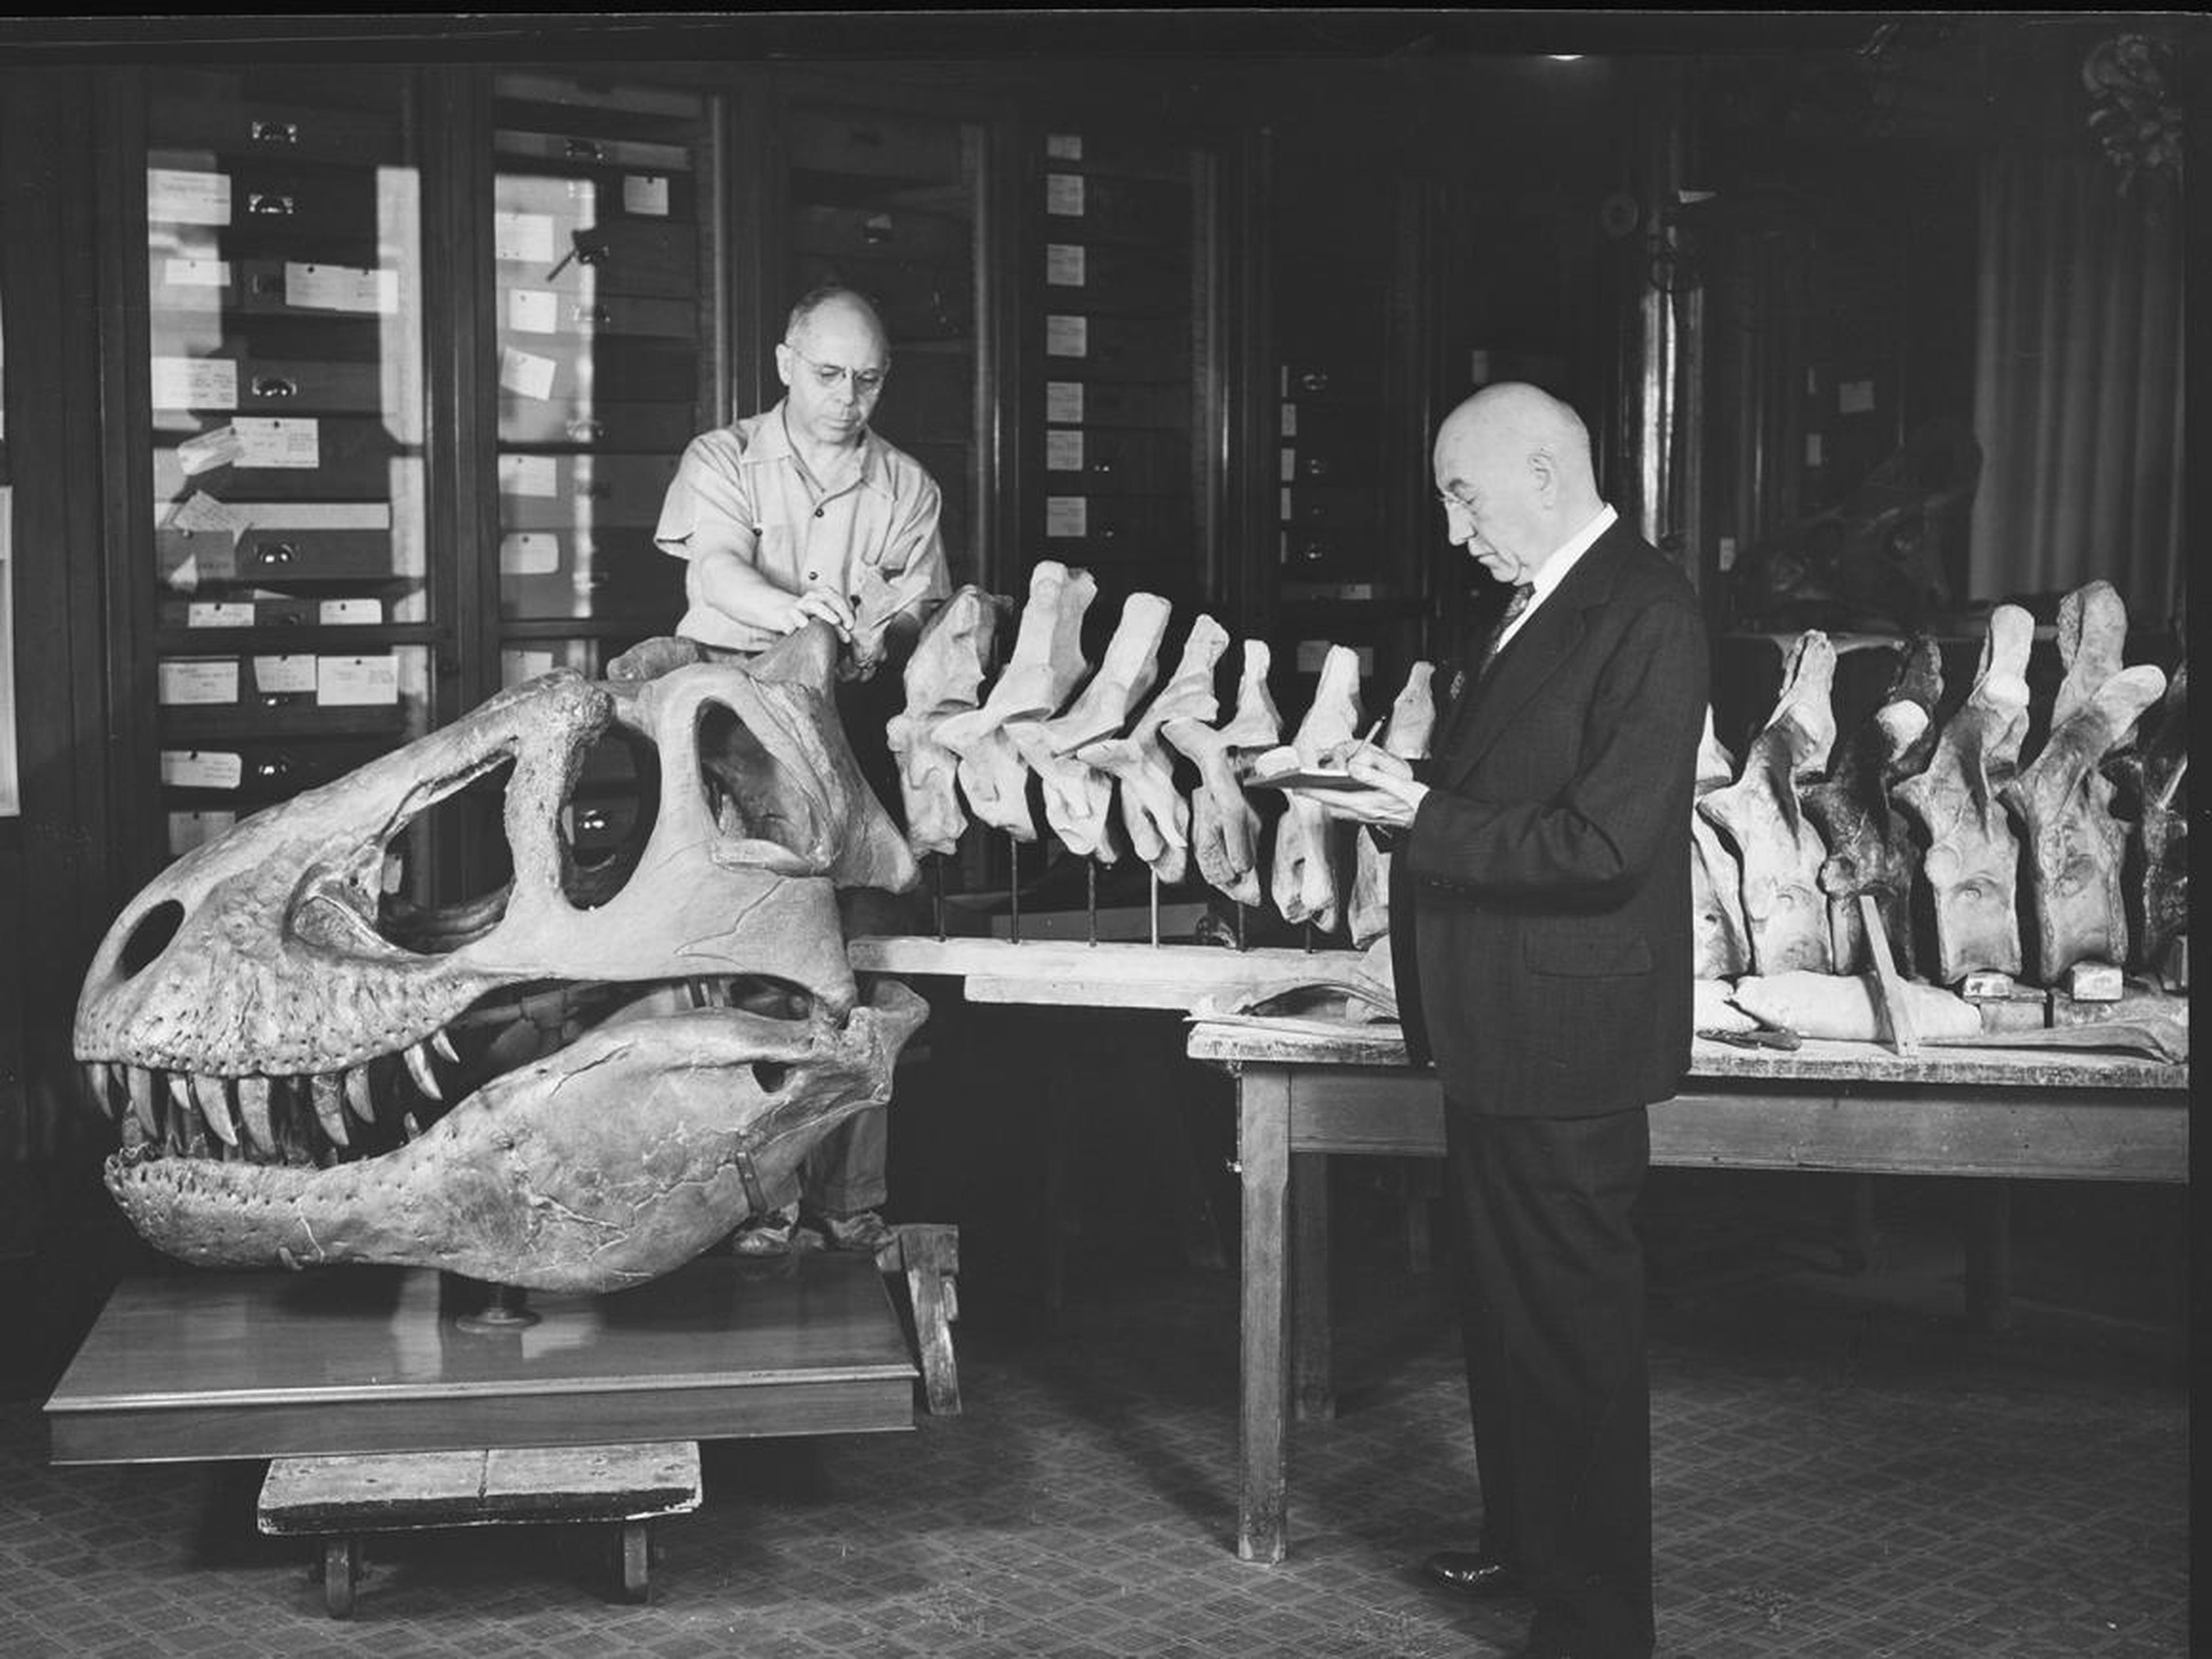 The first T. rex skeleton was discovered in 1902 by Barnum Brown, a paleontologist with the AMNH.